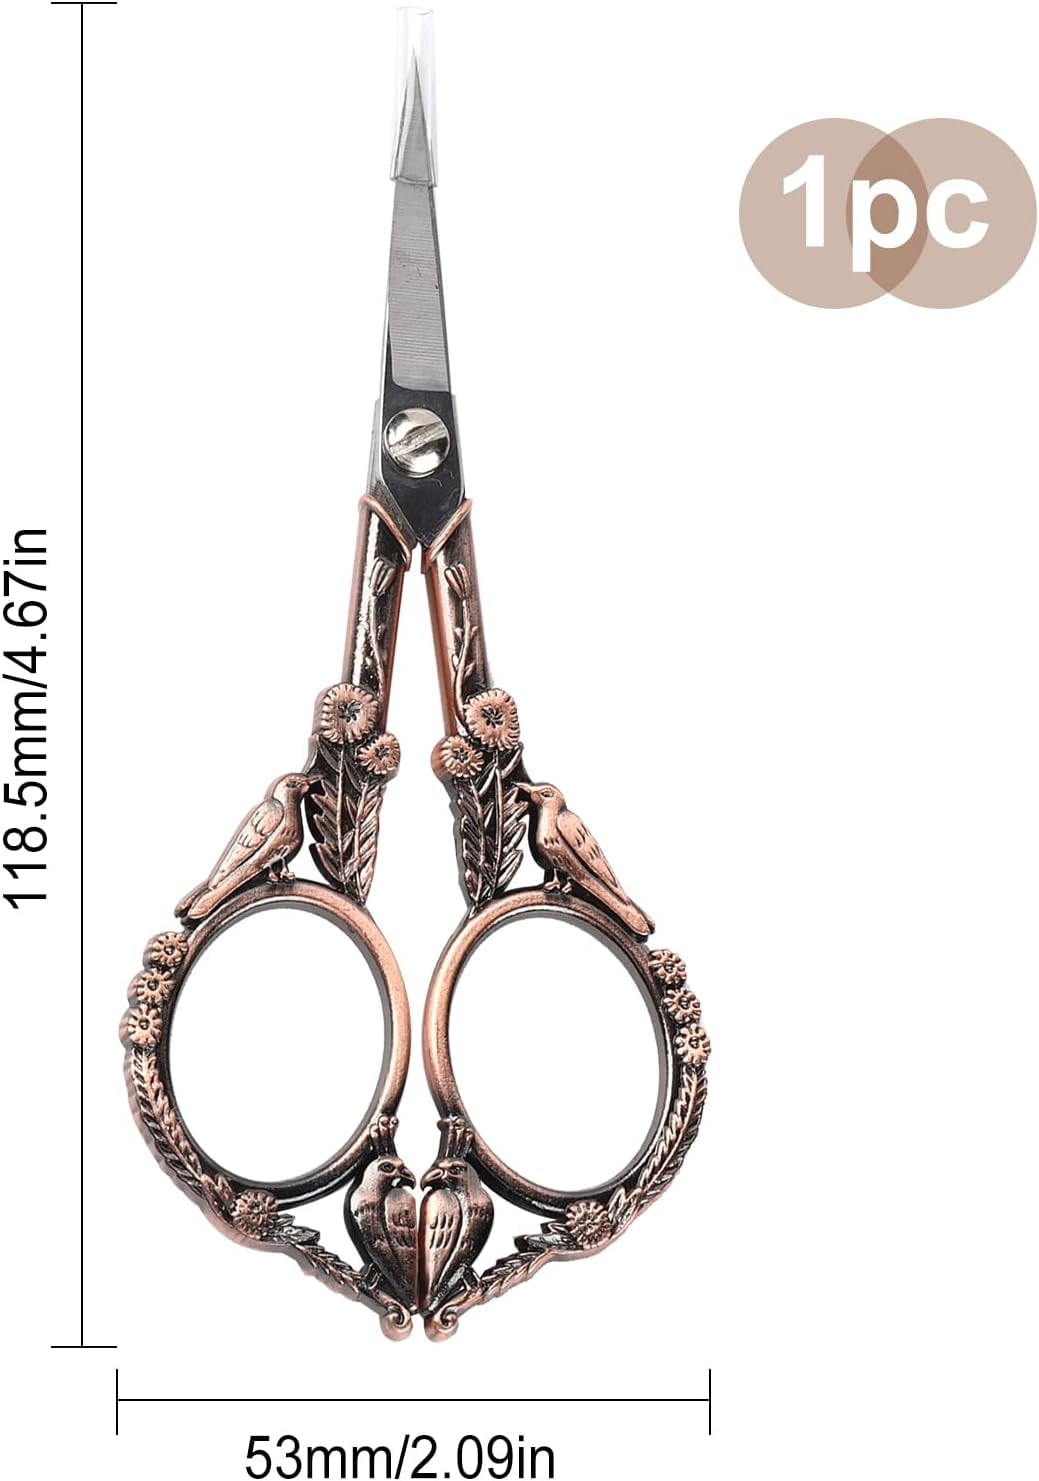 5 inch Vintage Stainless Steel Knitting Scissors Sharp Tip Sewing Scissors with Cover Leather Sheath, Size: 12.85x5.2x0.55cm